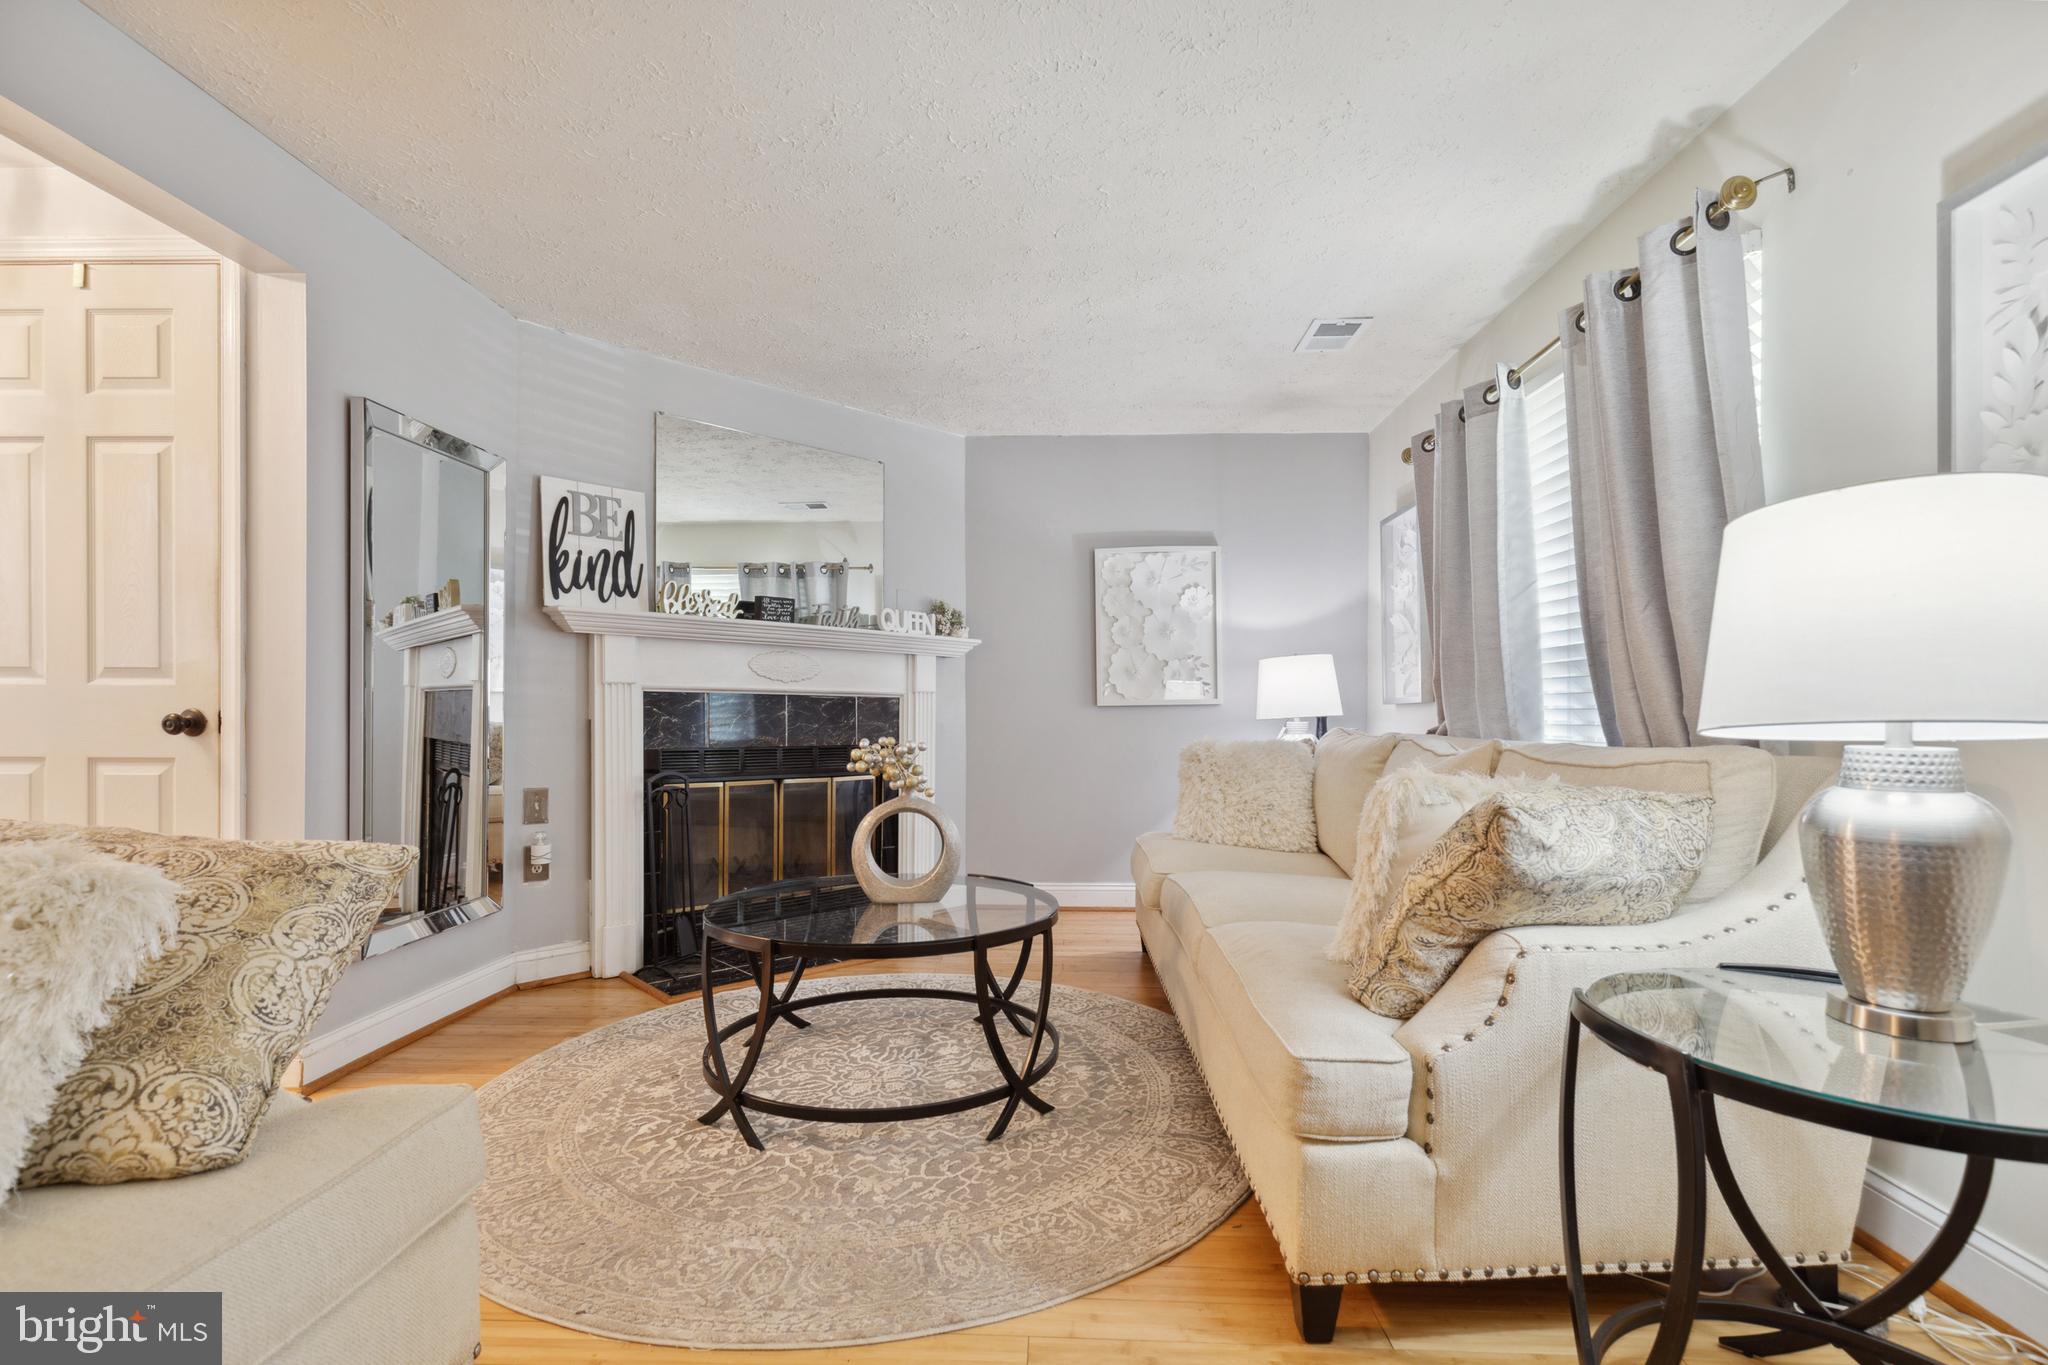 Welcome to 14406 Marlborough Drive where cozy meets sophistication.

Tastefully updated 3 Bedroom 1.